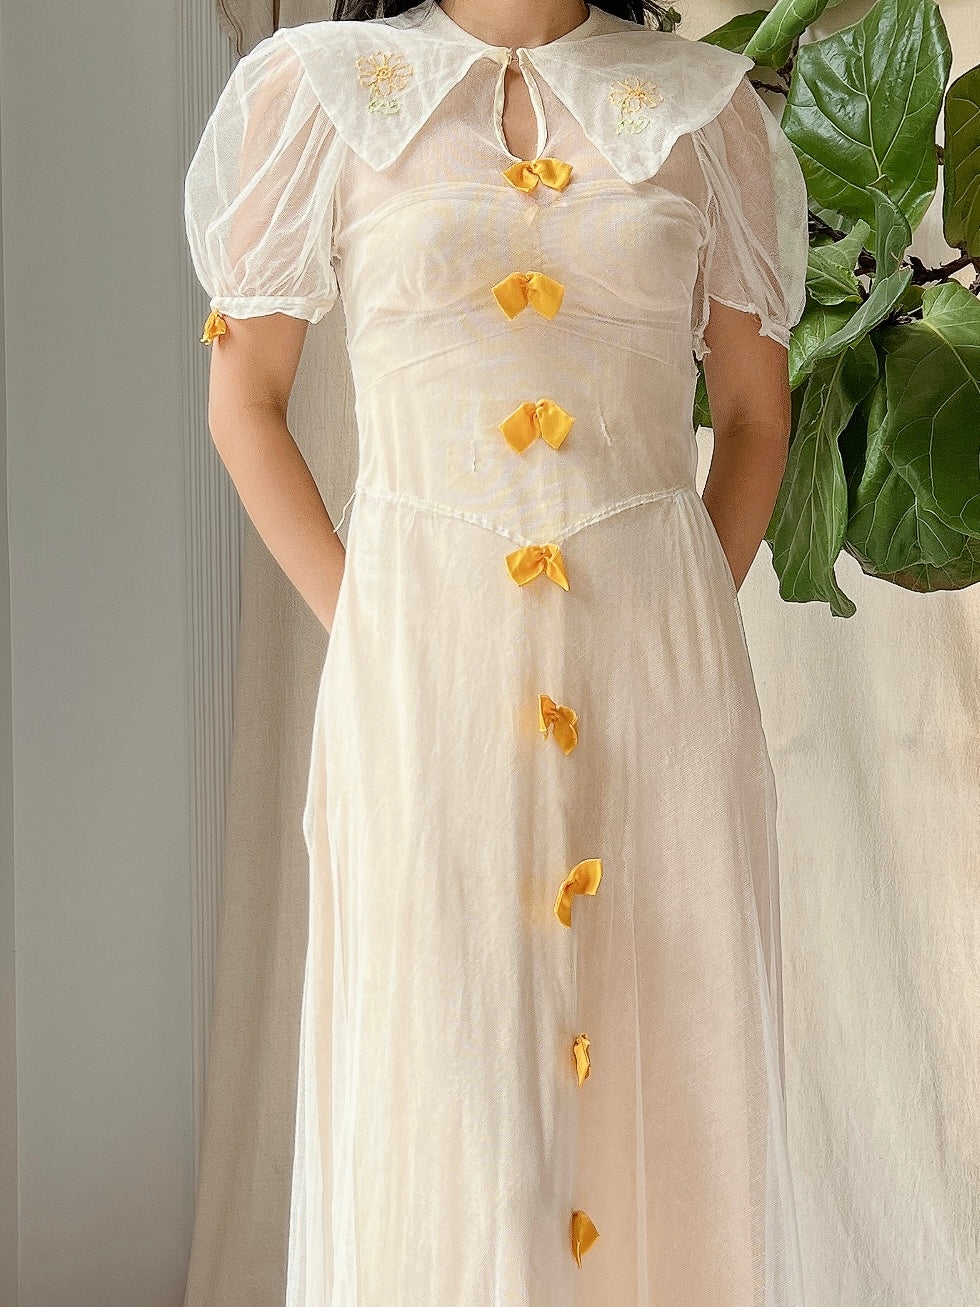 1930s Tulle Bow Dress - XS